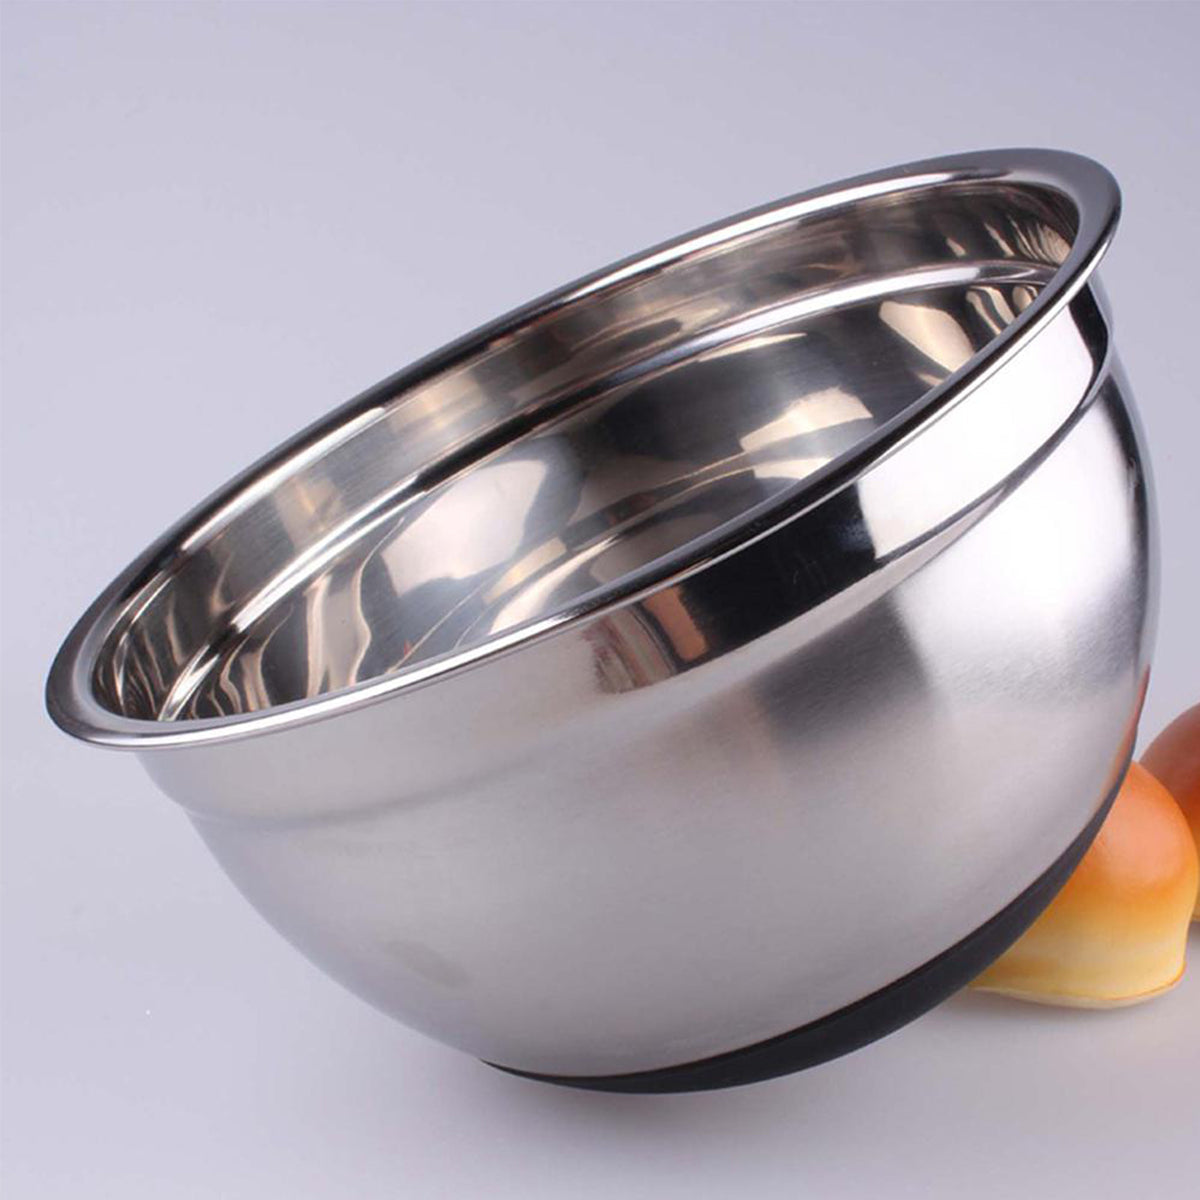 Mixing Bowl with Silicone Base